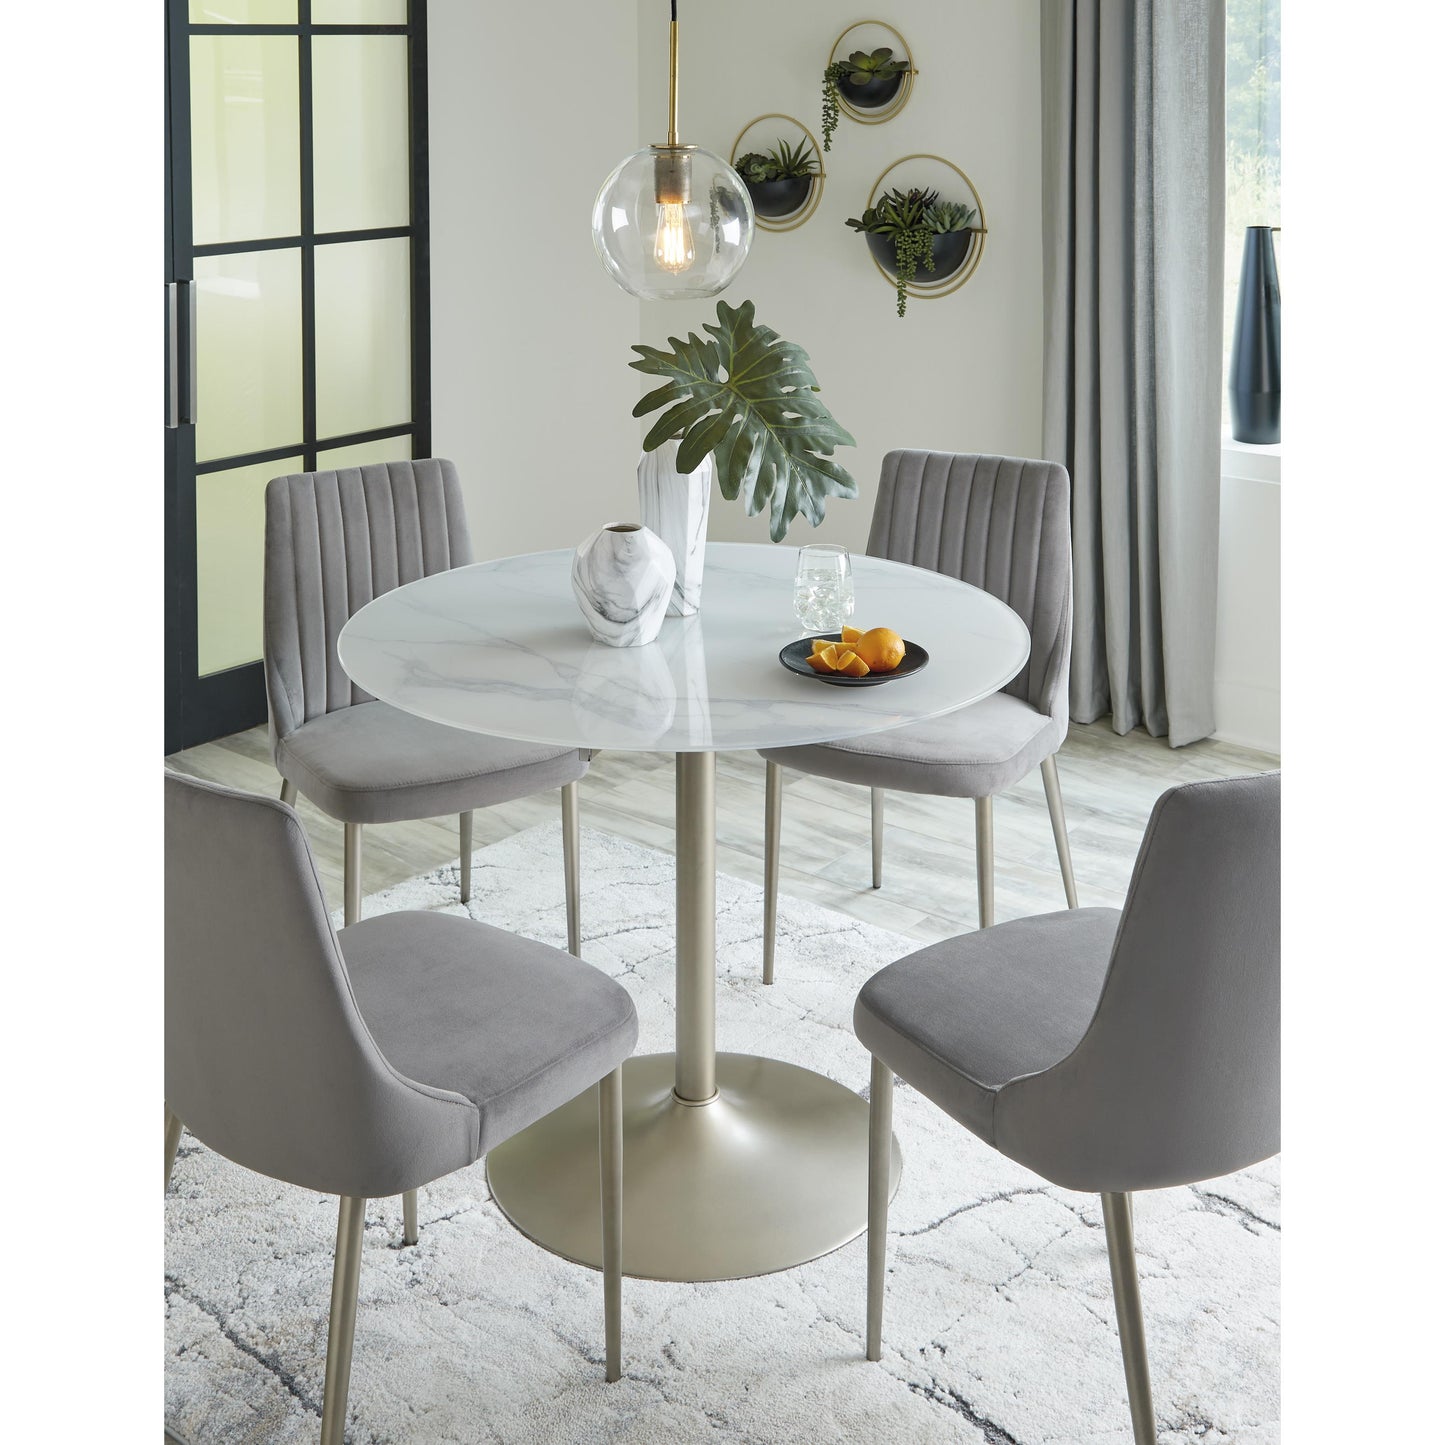 Signature Design by Ashley Round Barchoni Dining Table with Glass Top and Pedestal Base D262-15